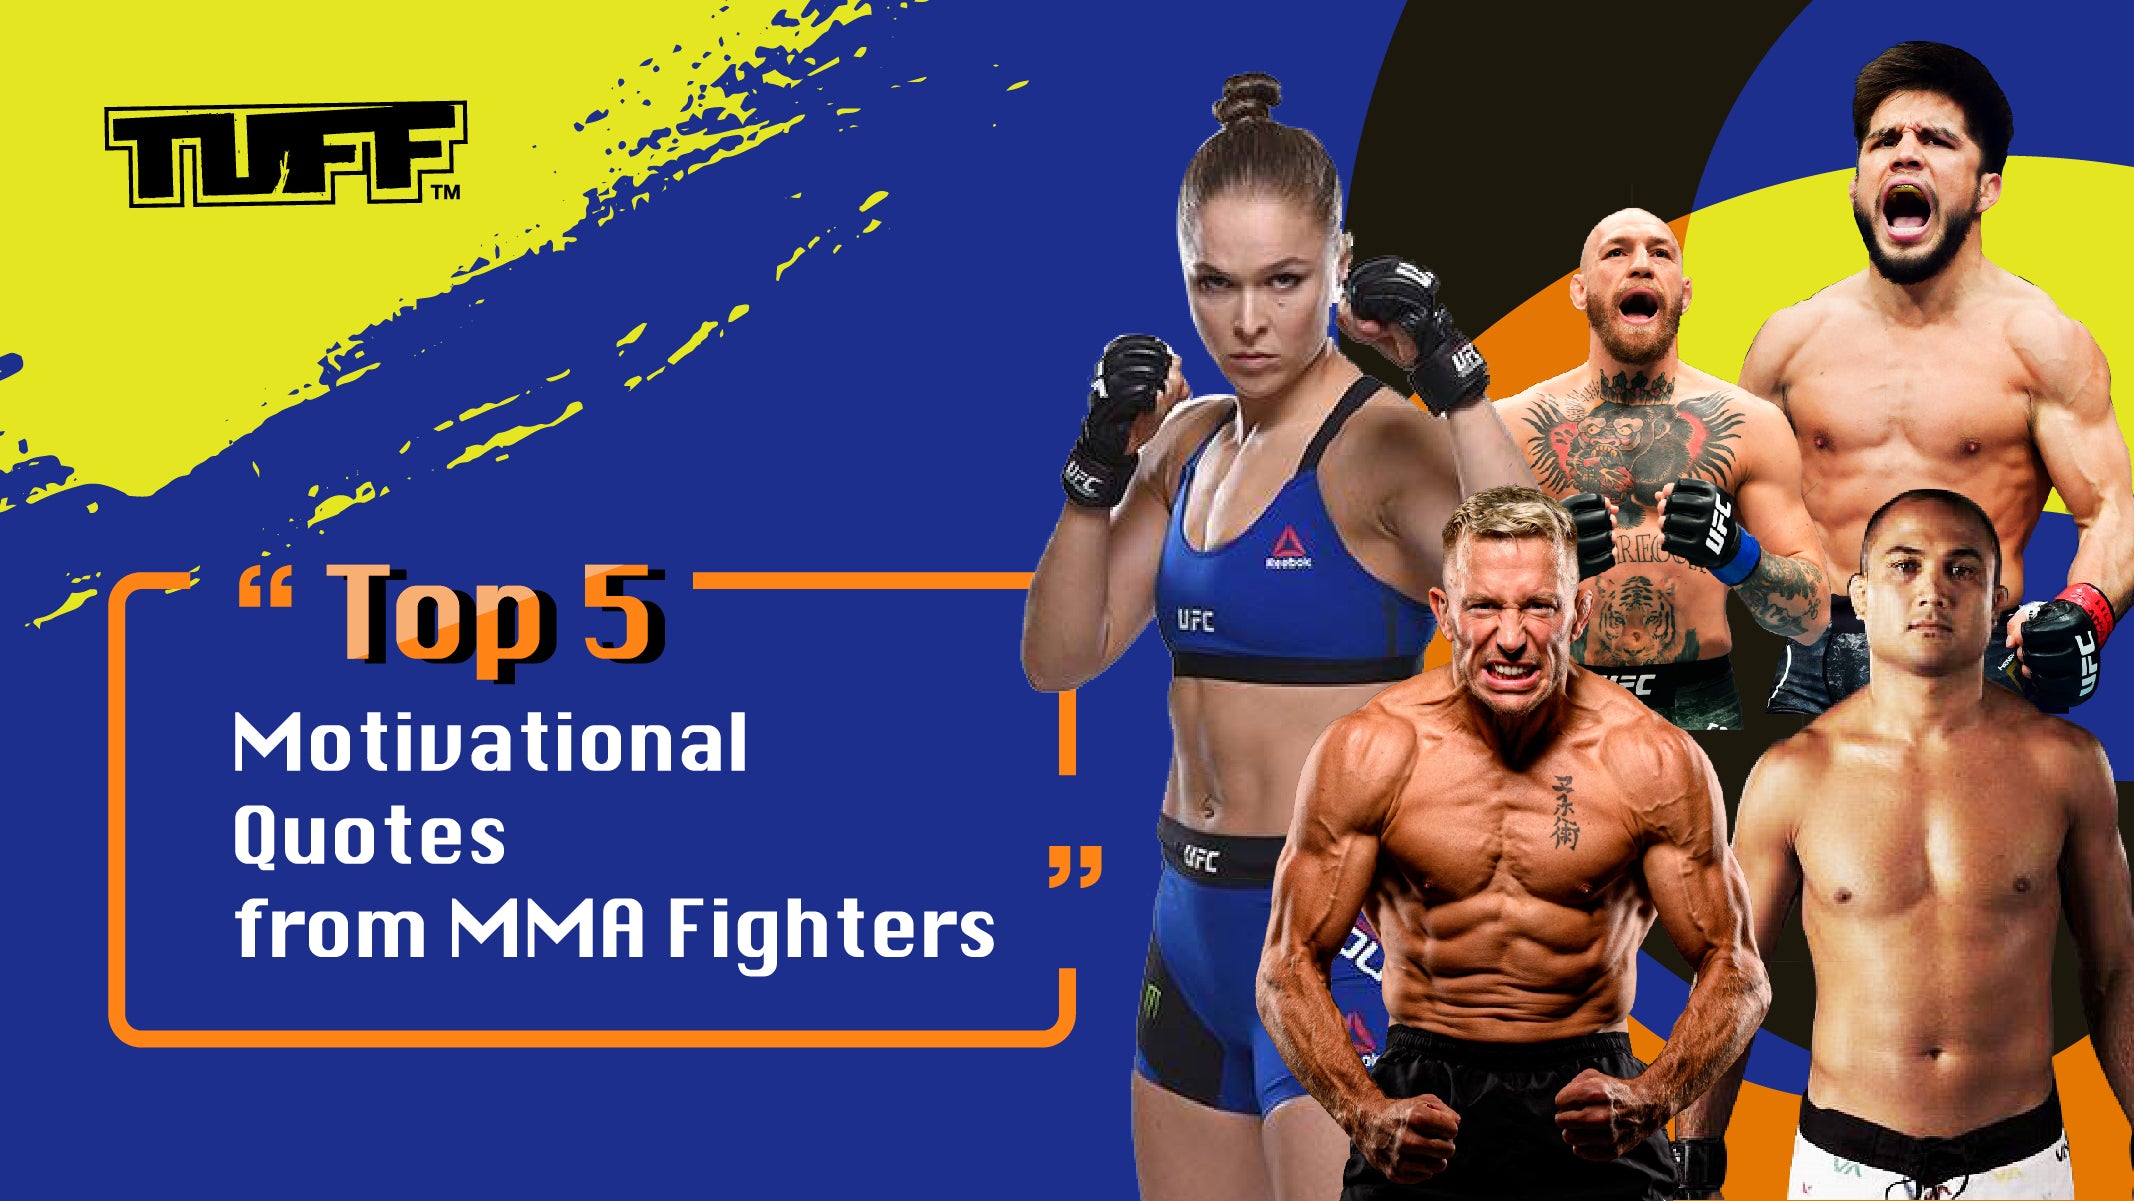 Top 5 Motivational Quotes from MMA Fighters